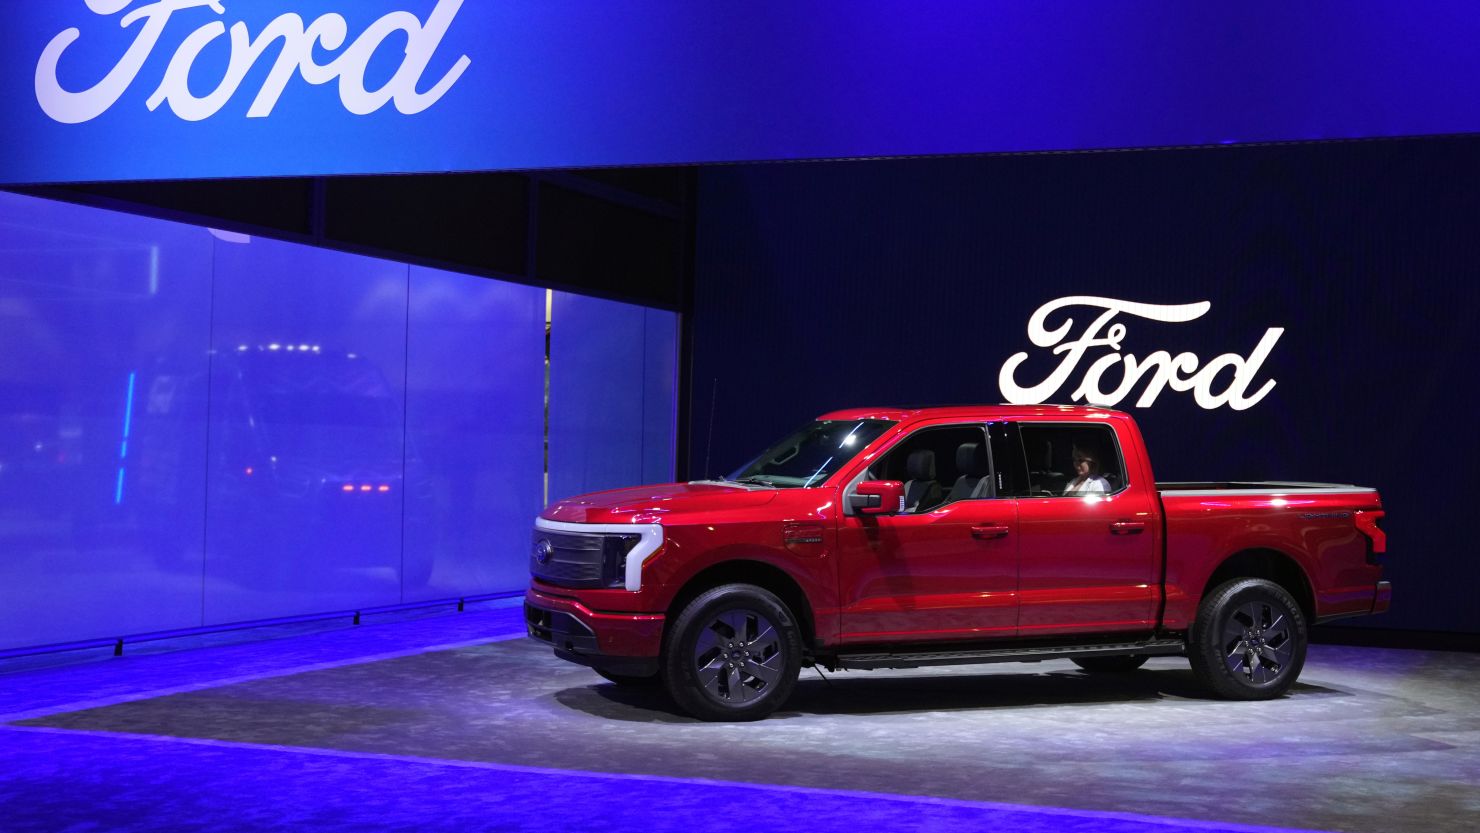 Ford Recently Disclosed a Substantial Financial Shortfall of $132,000 on Each Electric Vehicle It Has Sold